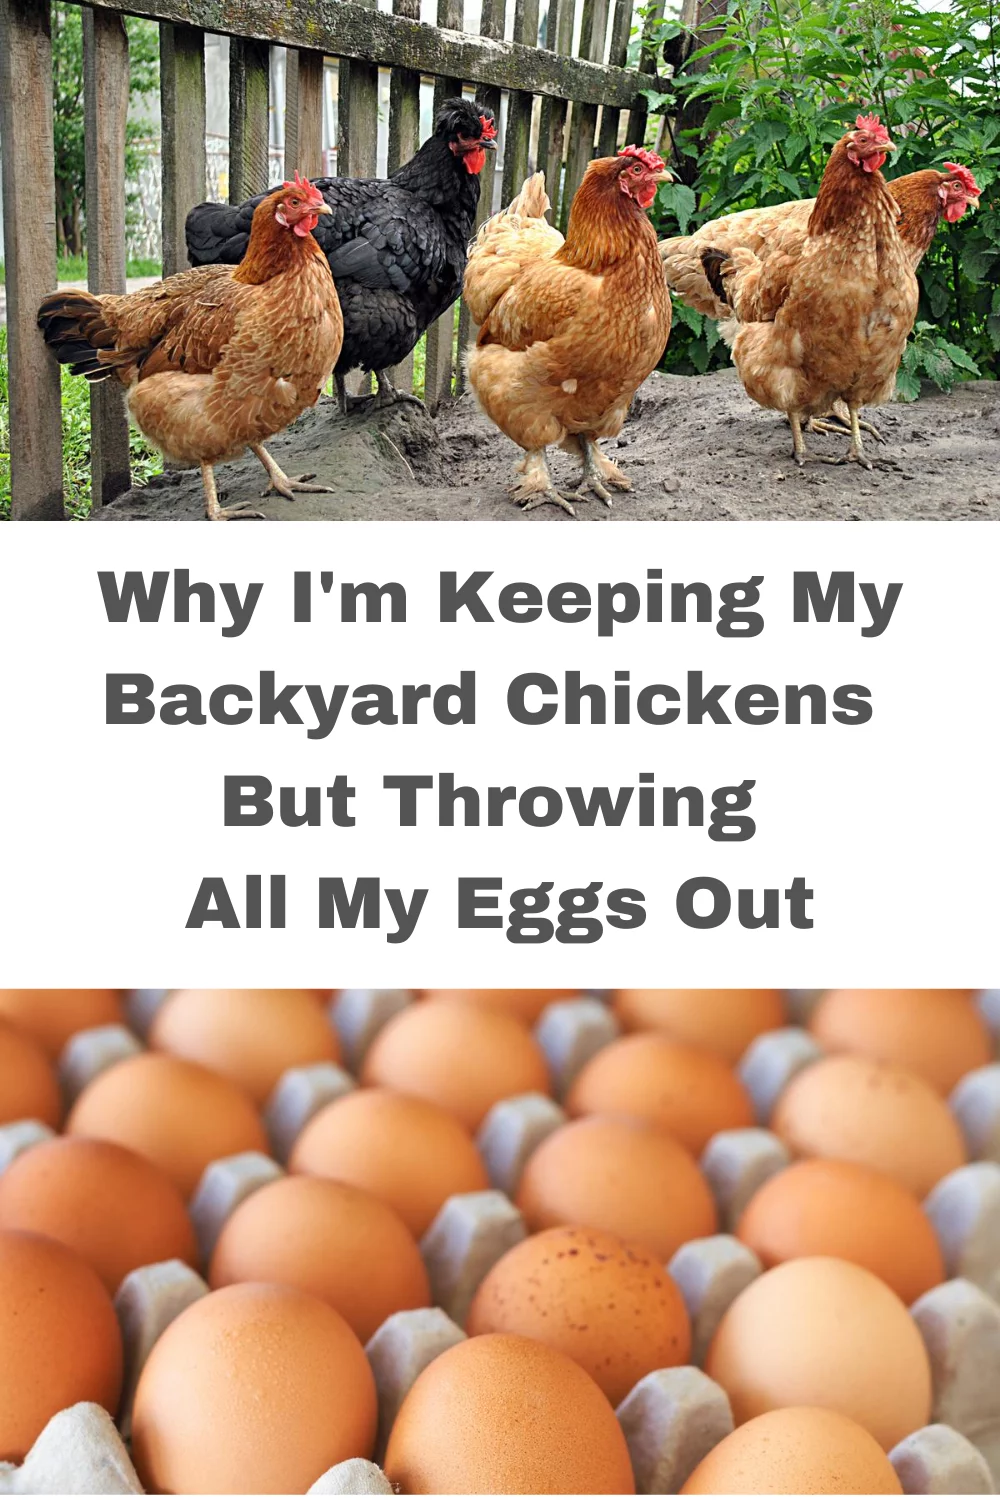 DDT--Why I'm Keeping My Backyard Chickens But Throwing All My Eggs Out